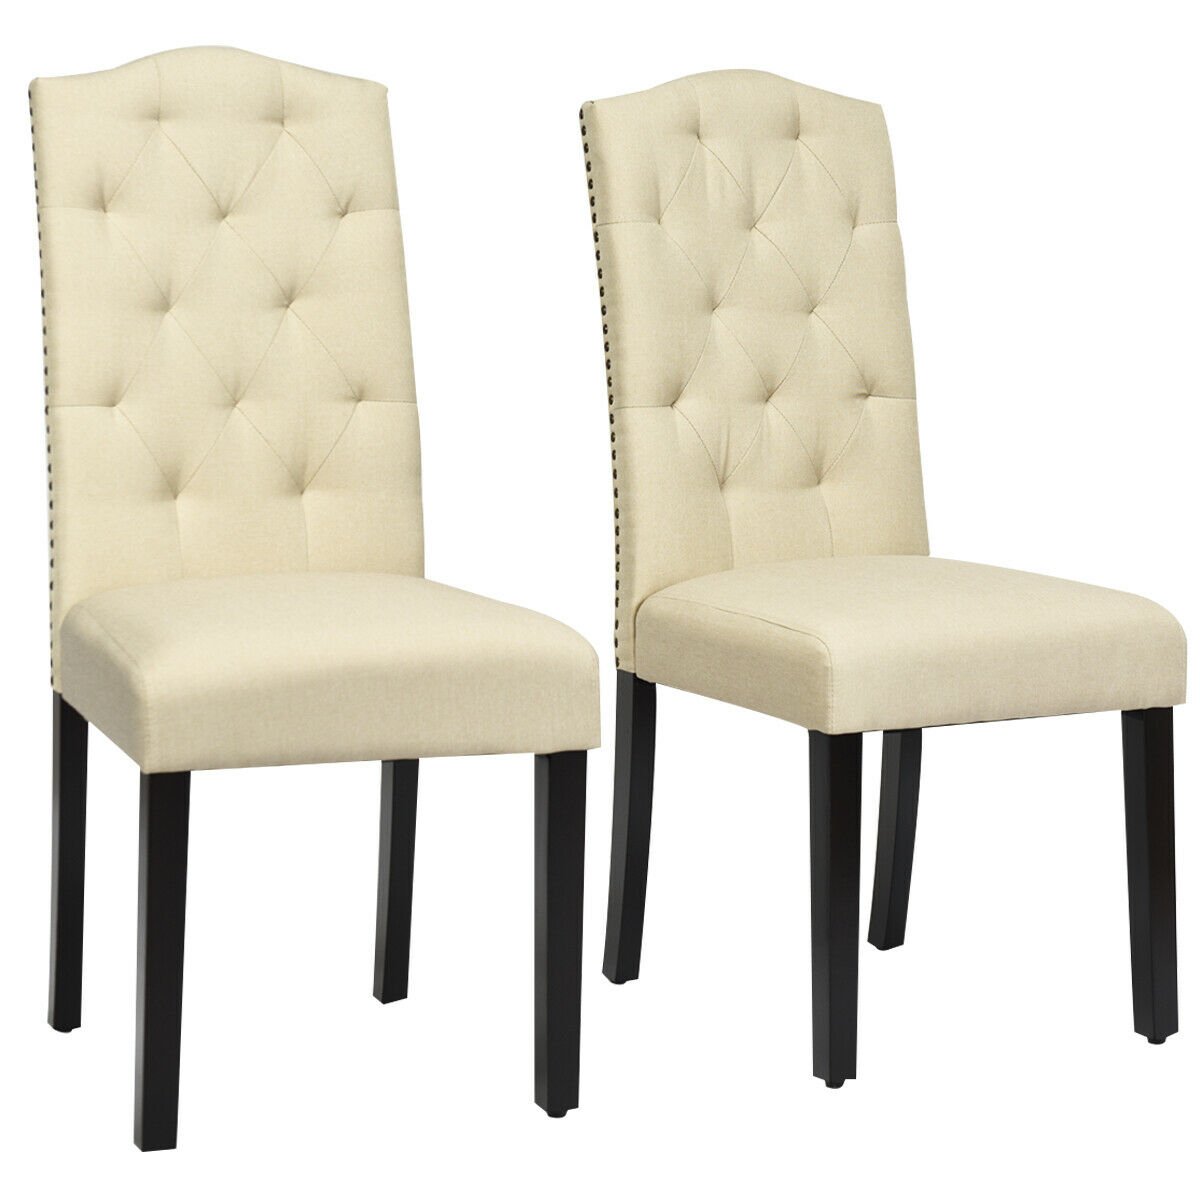 Set Of 2 Tufted Upholstered Dining Chair W/ Nailhead Trim & Rubber Wooden Legs